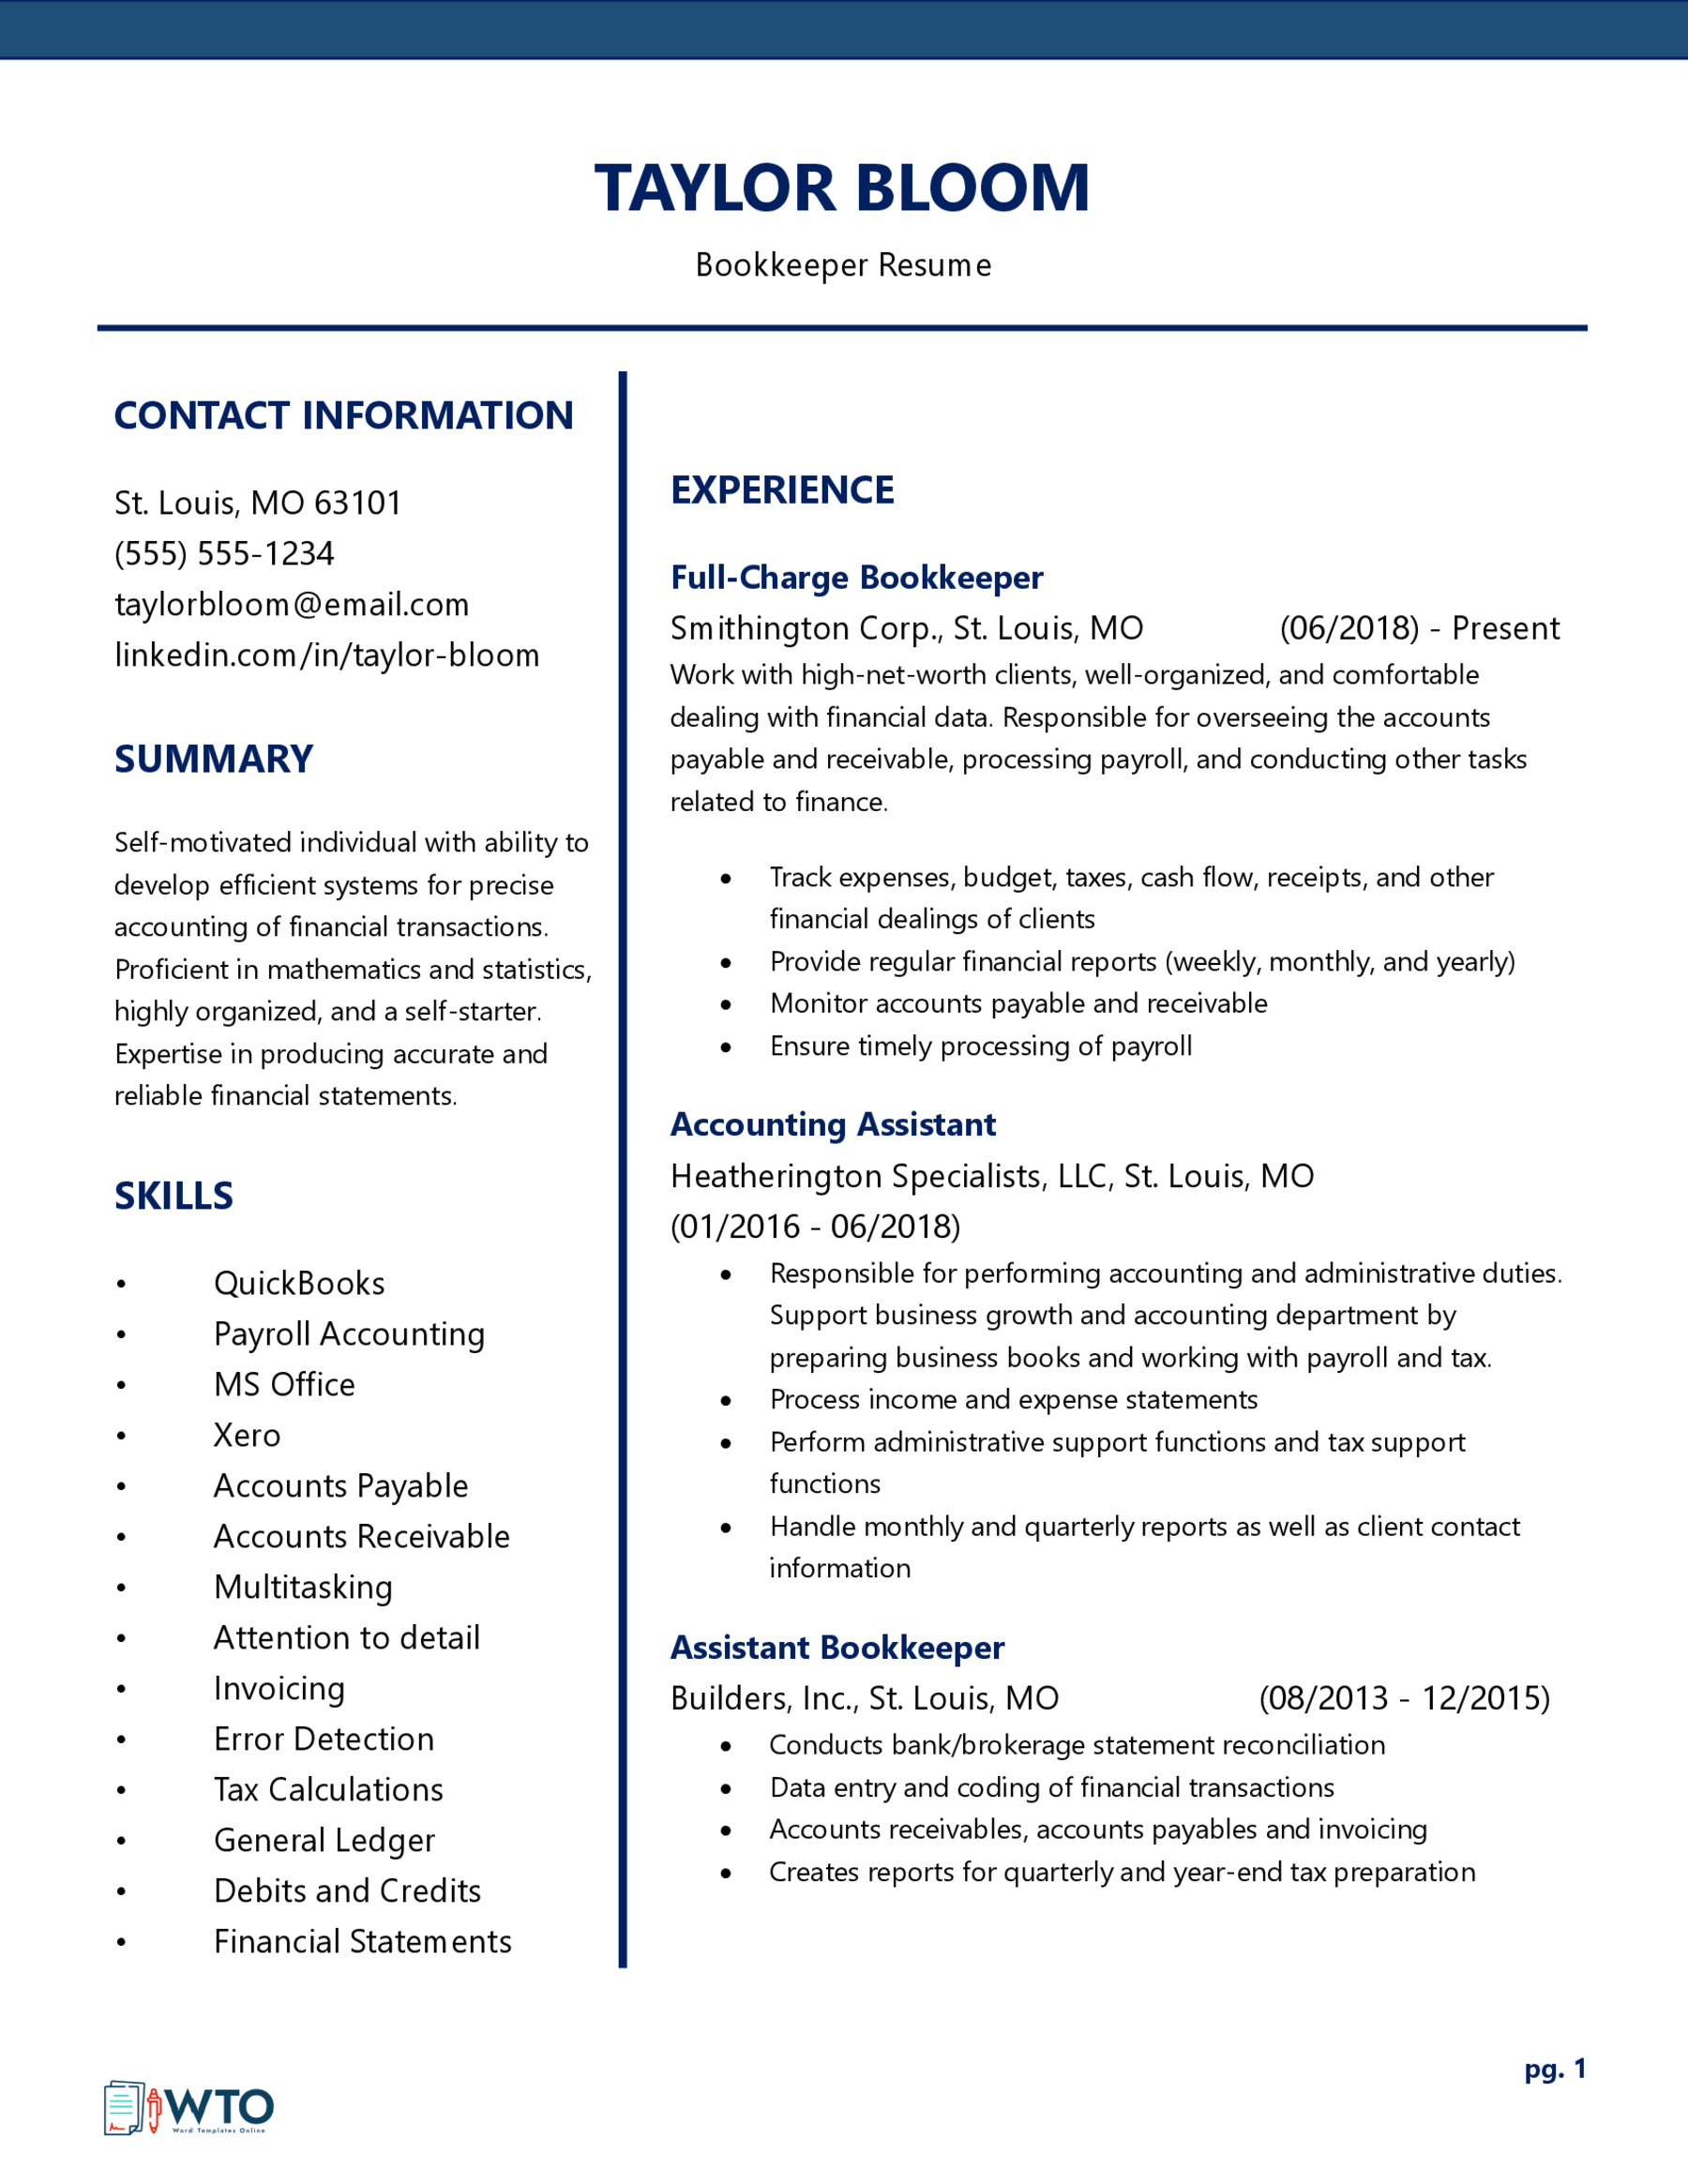 Downloadable Bookkeeper Resume Template - Word Format